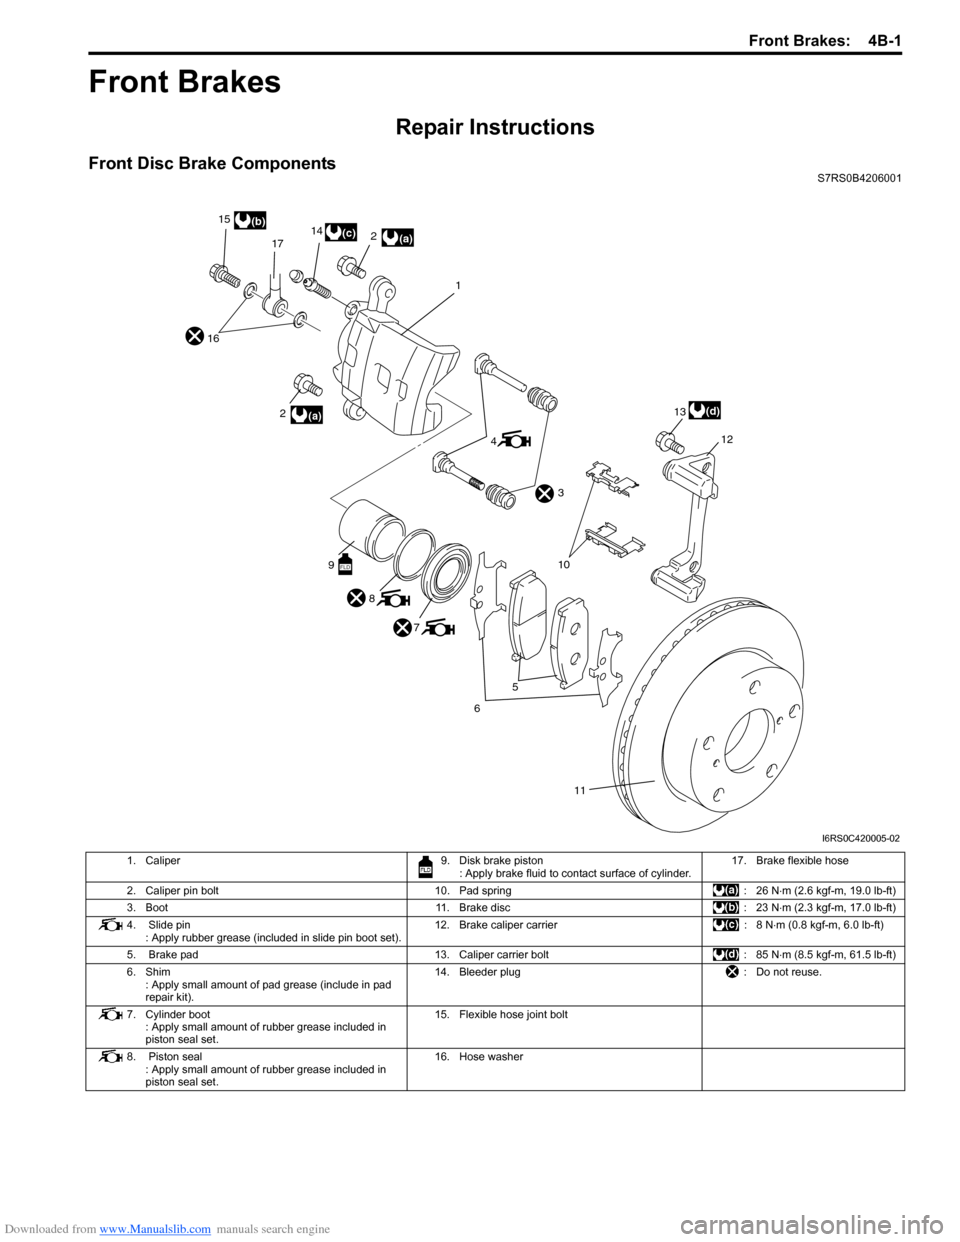 SUZUKI SWIFT 2008 2.G Service Workshop Manual Downloaded from www.Manualslib.com manuals search engine Front Brakes:  4B-1
Brakes
Front Brakes
Repair Instructions
Front Disc Brake ComponentsS7RS0B4206001
11
5
6
10
4
1
16
17
12
8
7
3
2(a)
15
(b)
1